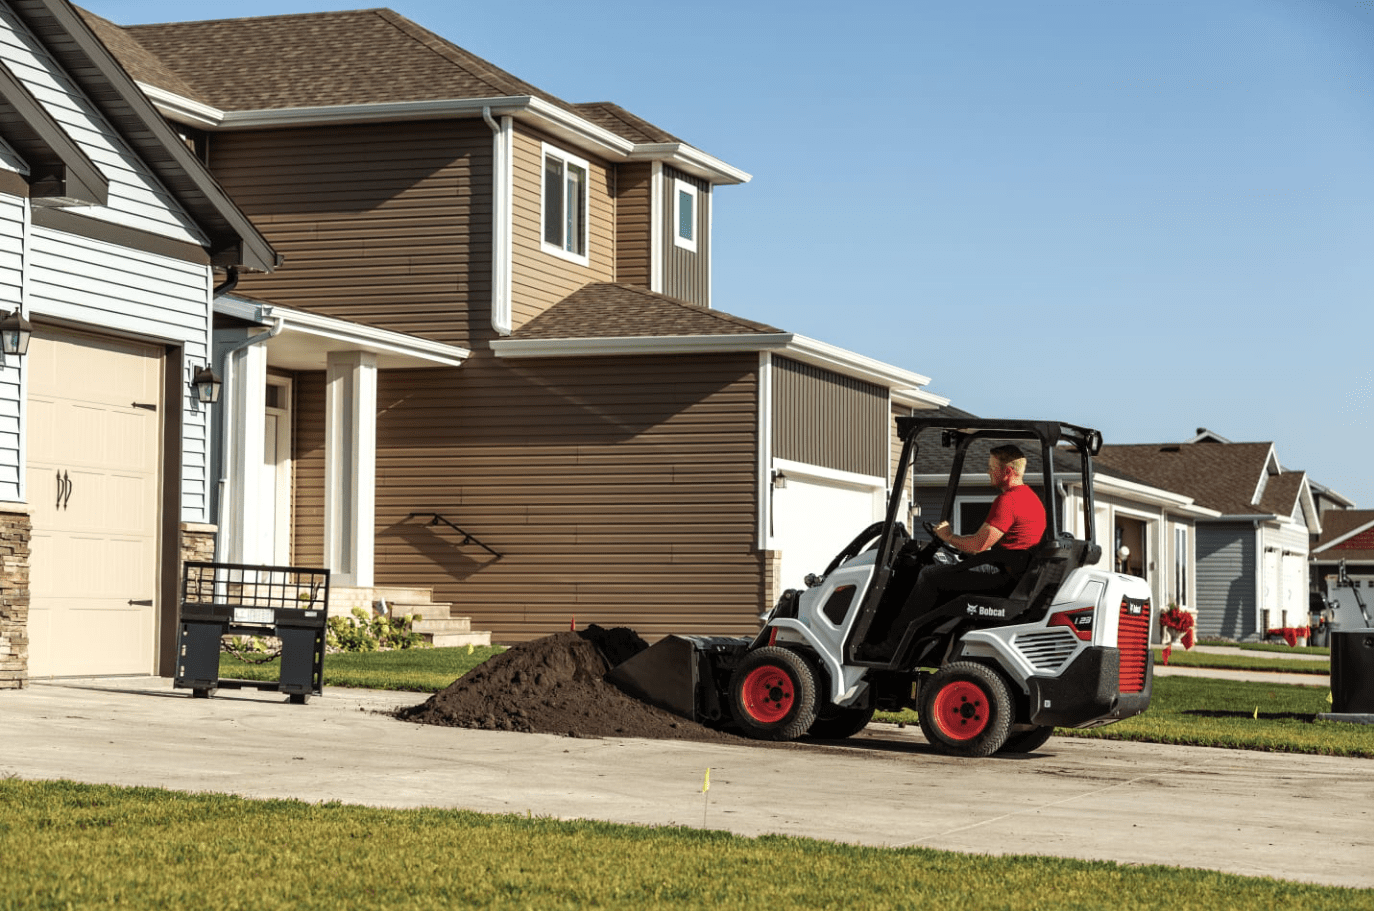 Browse Specs and more for the L23 Small Articulated Loader - Bobcat of Atlanta